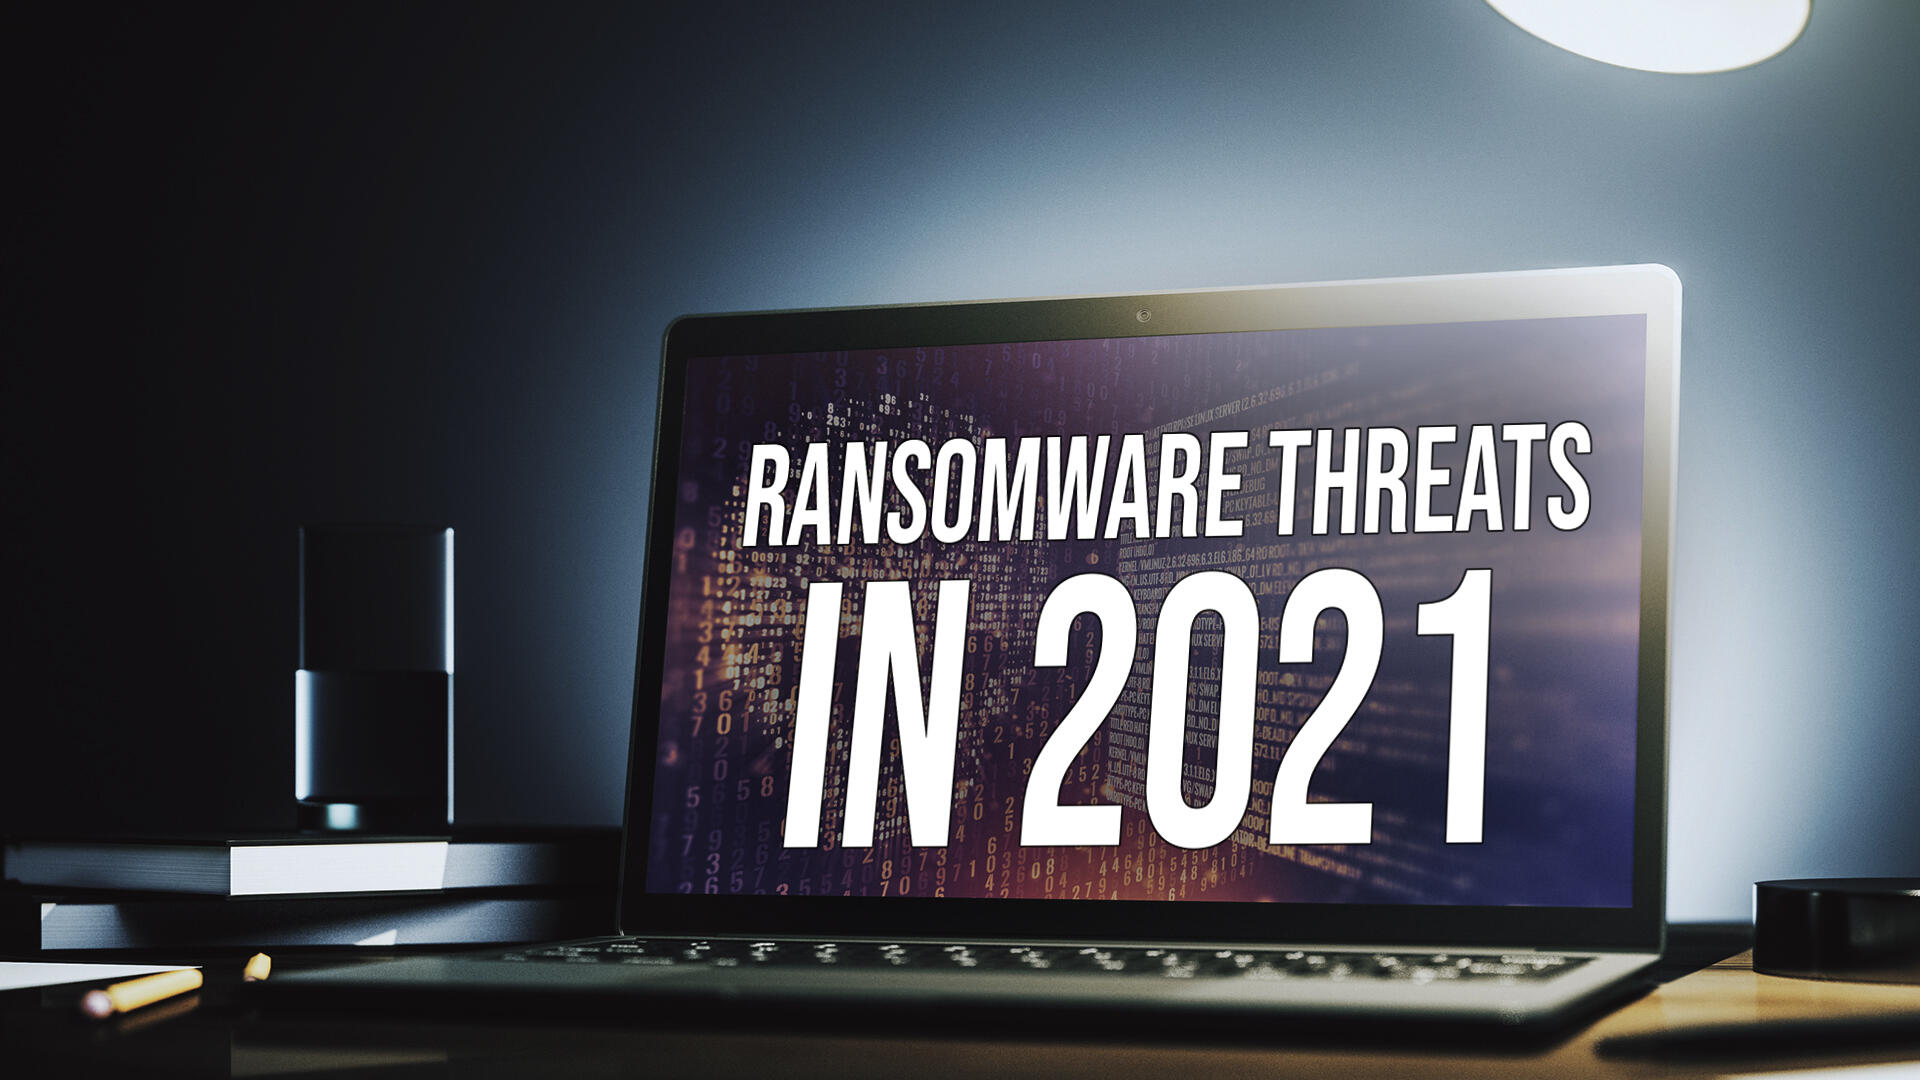 Crimeware-as-a-service is the latest ransomware threat